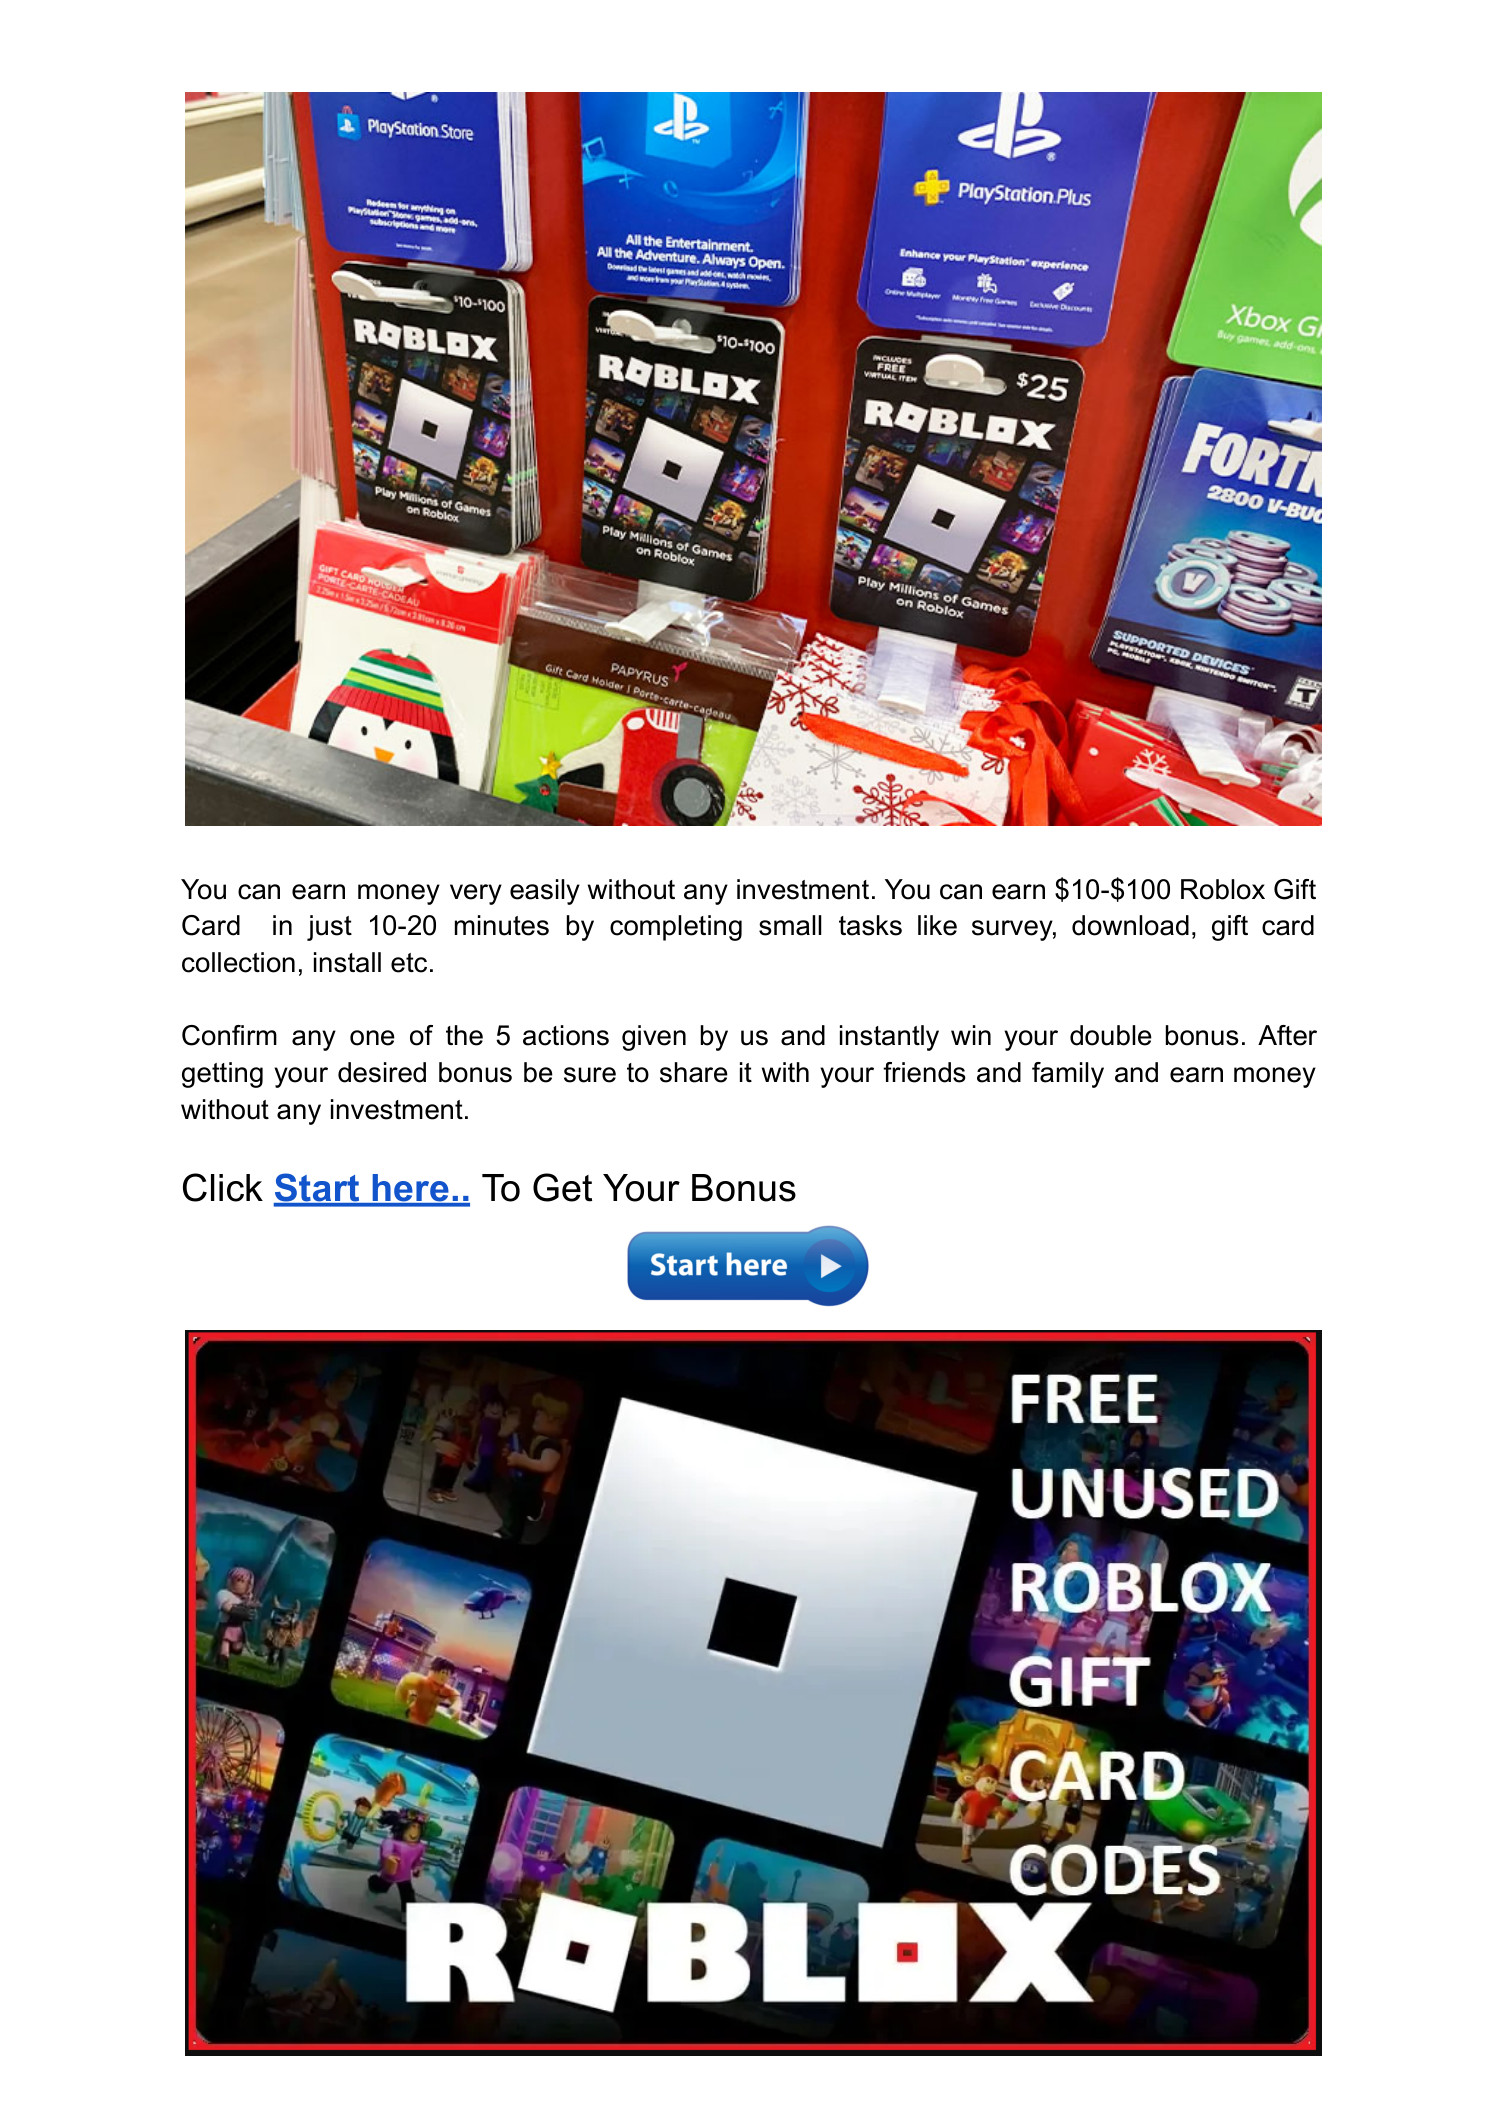 List Of Free Unused Roblox Gift Cards Codes.pdf DocDroid